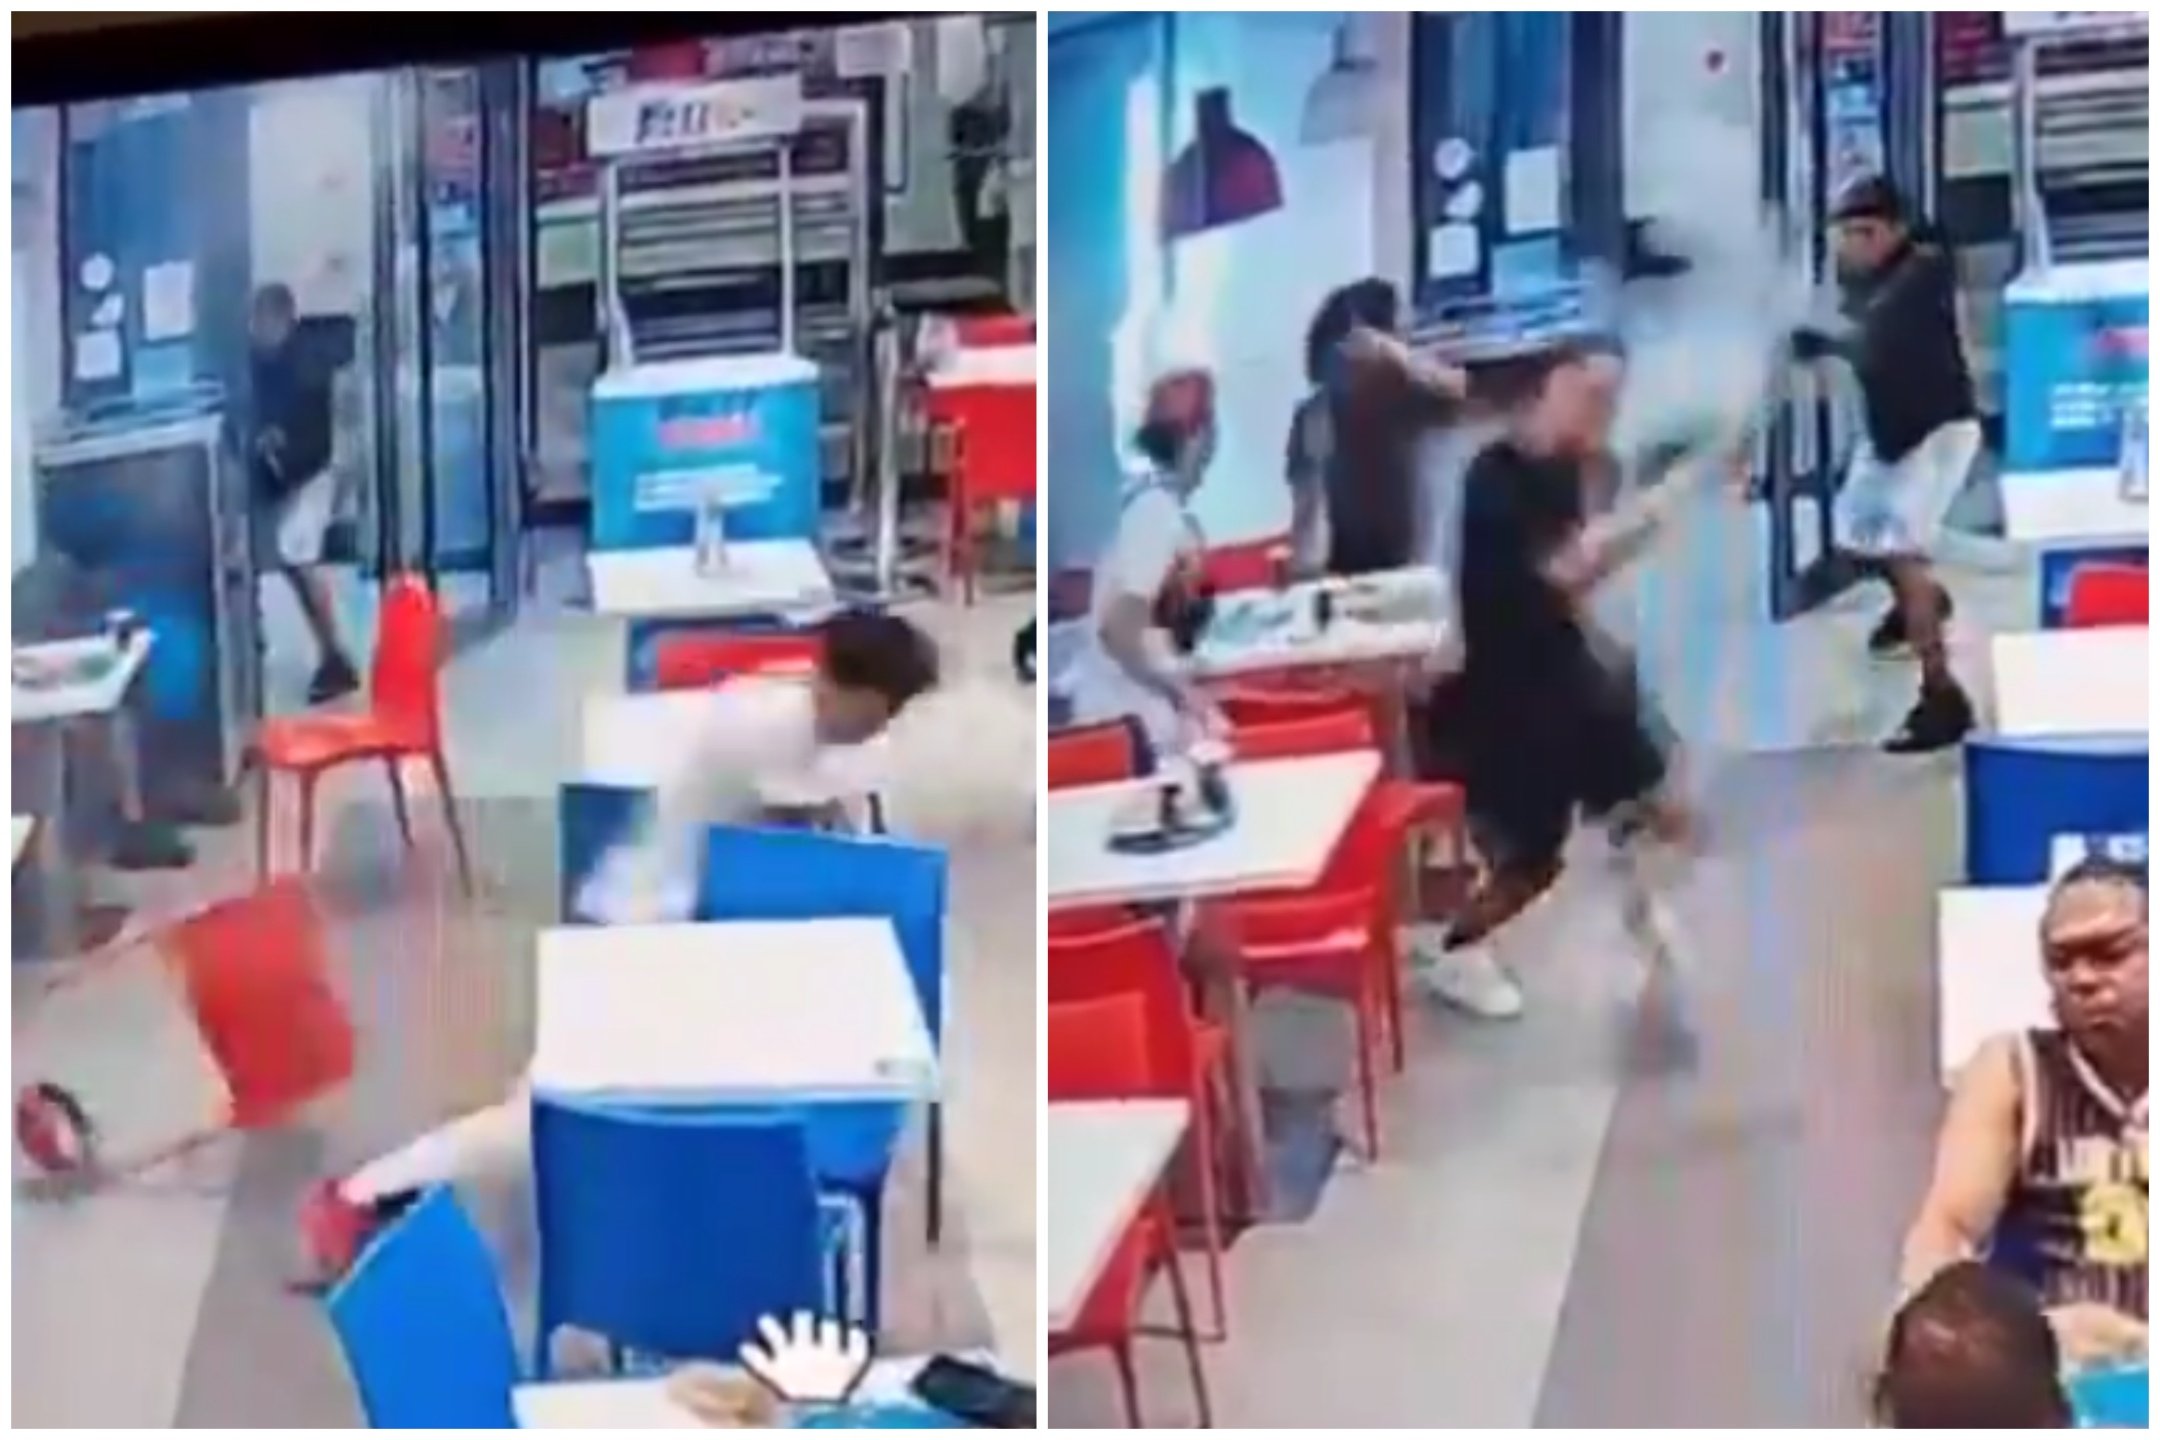 Shooting in Madrid: CCTV shows terrifying moment shotgun-wielding man opens fire in a restaurant